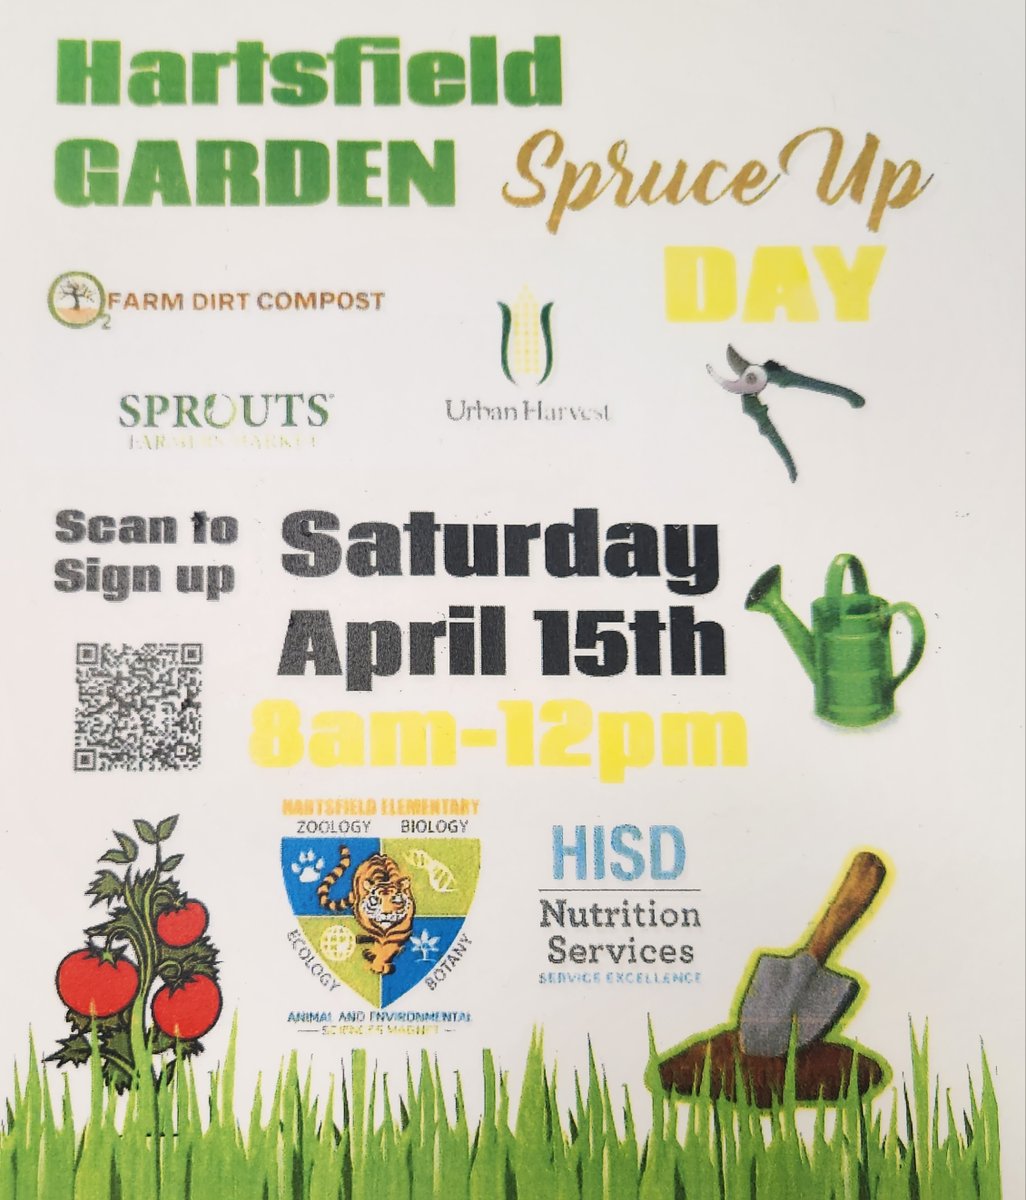 Special thanks to our @HISD_Wraparound specialist Mr. Godley for securing volunteers, snacks, and hydration products for our garden spruce up day! @sproutsfm @oakfarmsdairy @HartsfieldAES @TeamHISD @HISDChoice